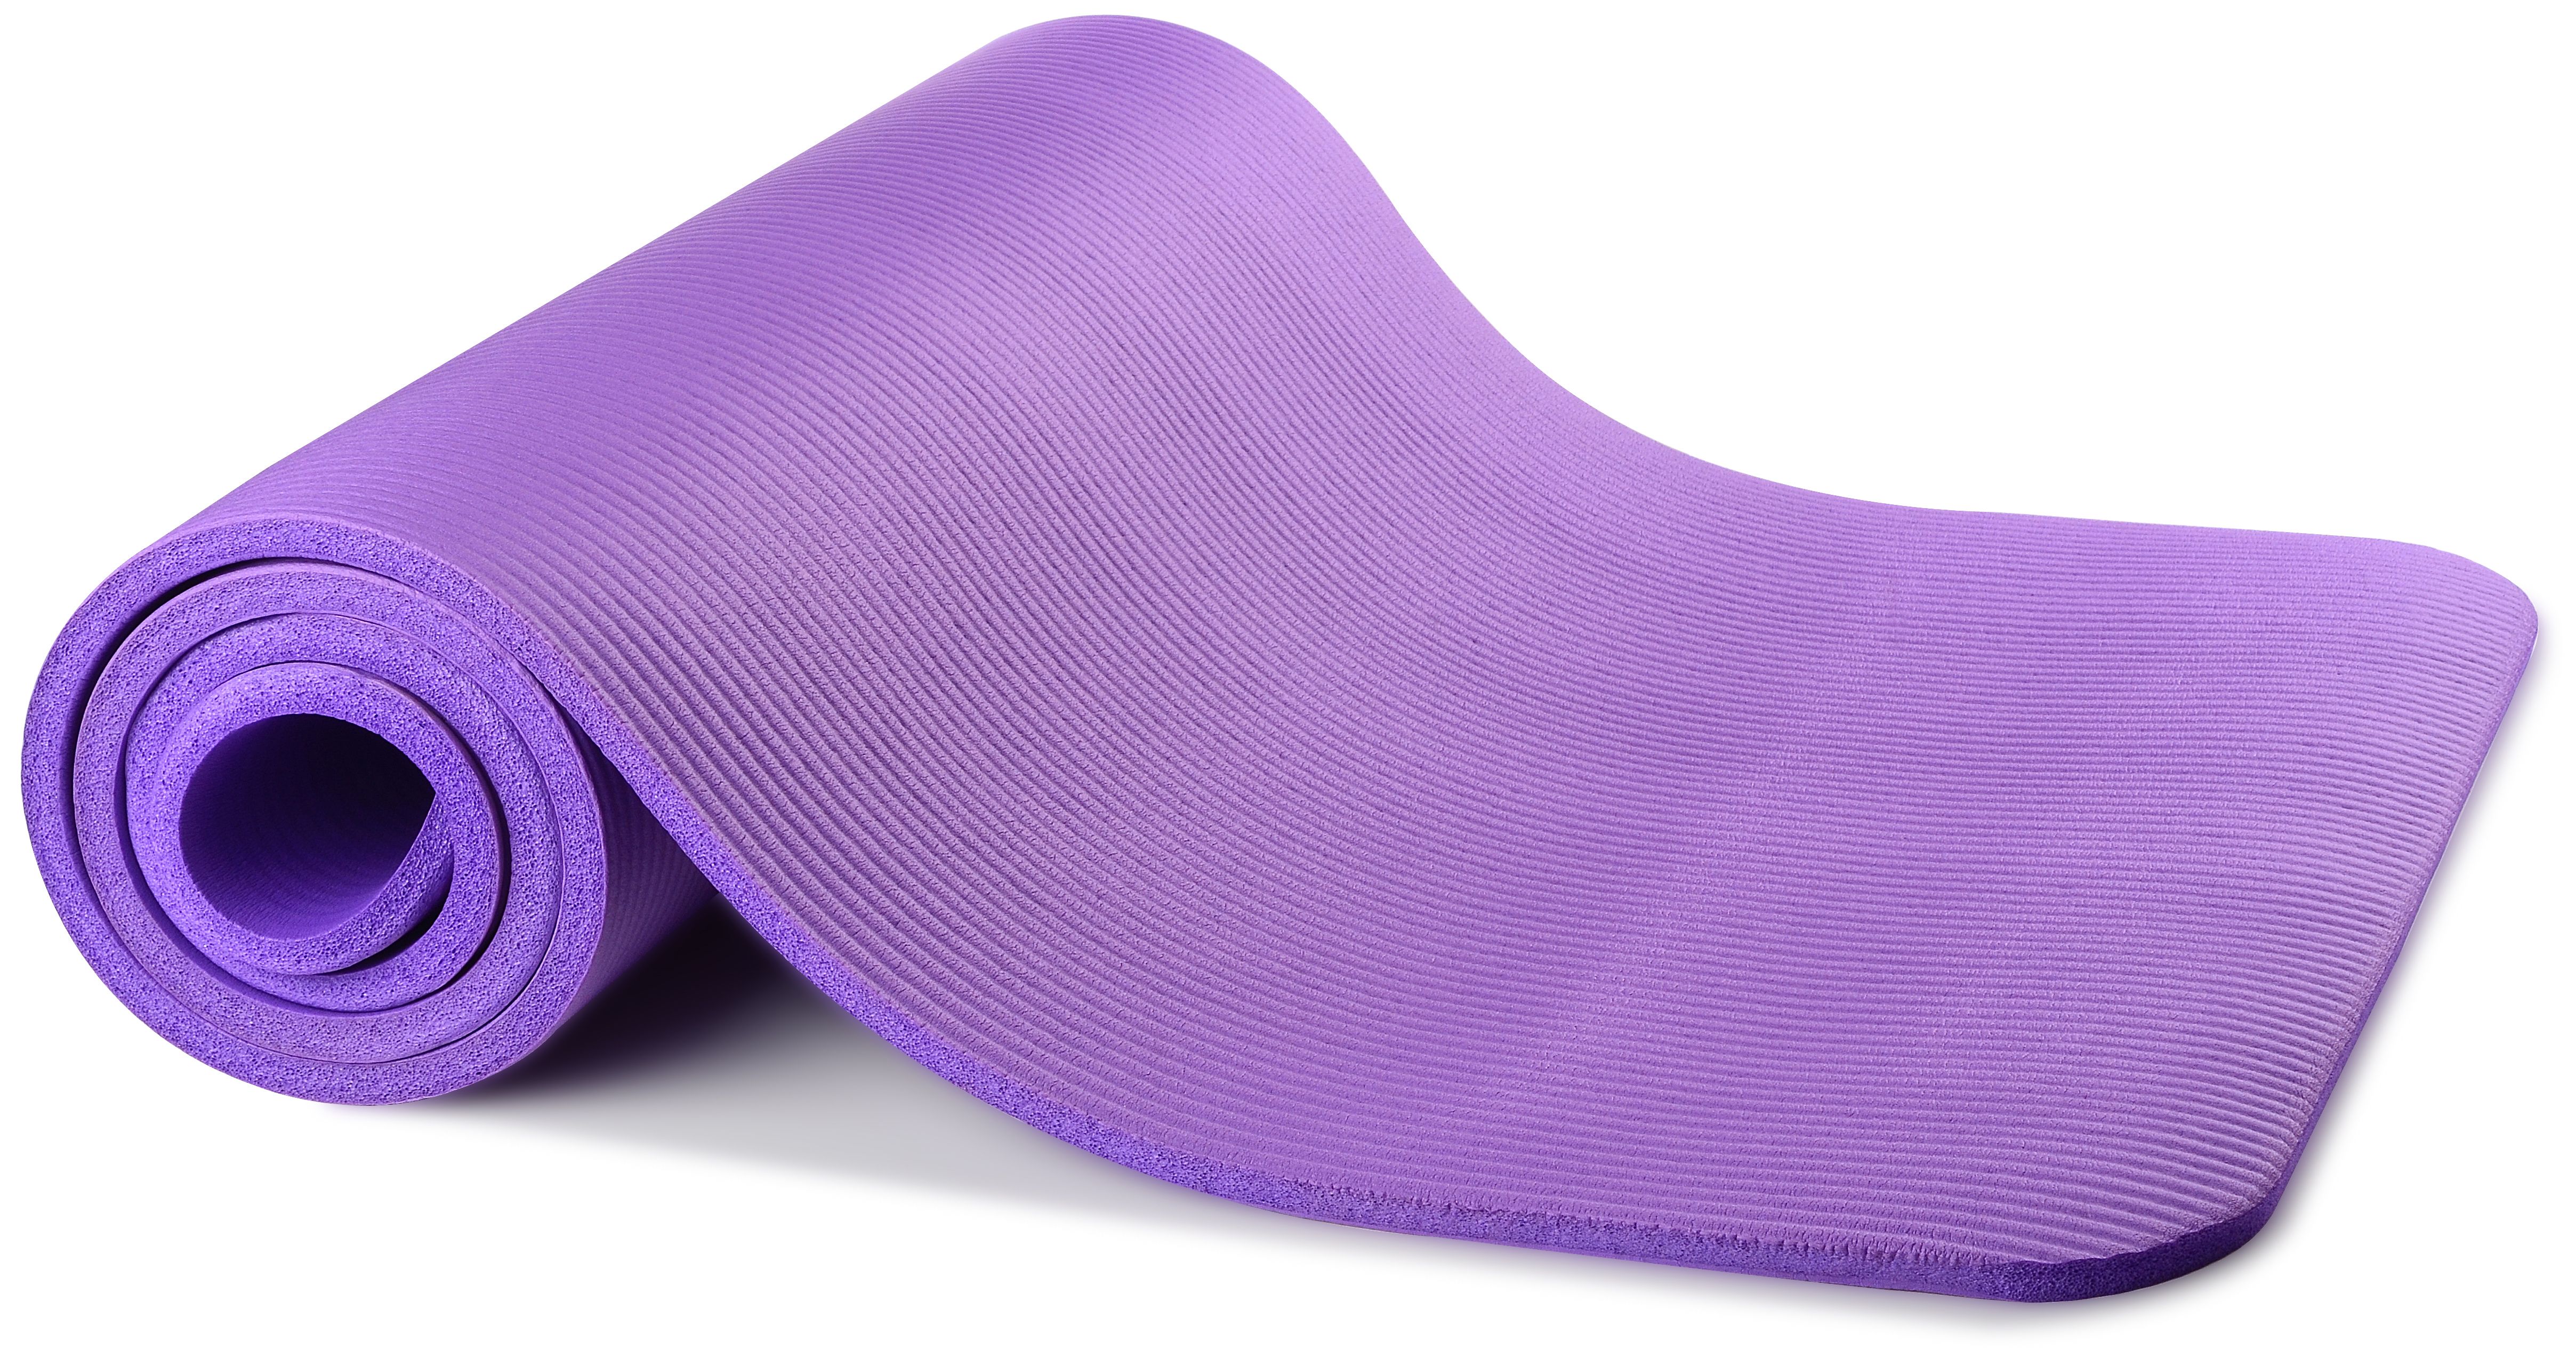 BalanceFrom All-Purpose 1/2 In. High Density Foam Exercise Yoga Mat Anti-Tear with Carrying Strap, Purple - image 3 of 5